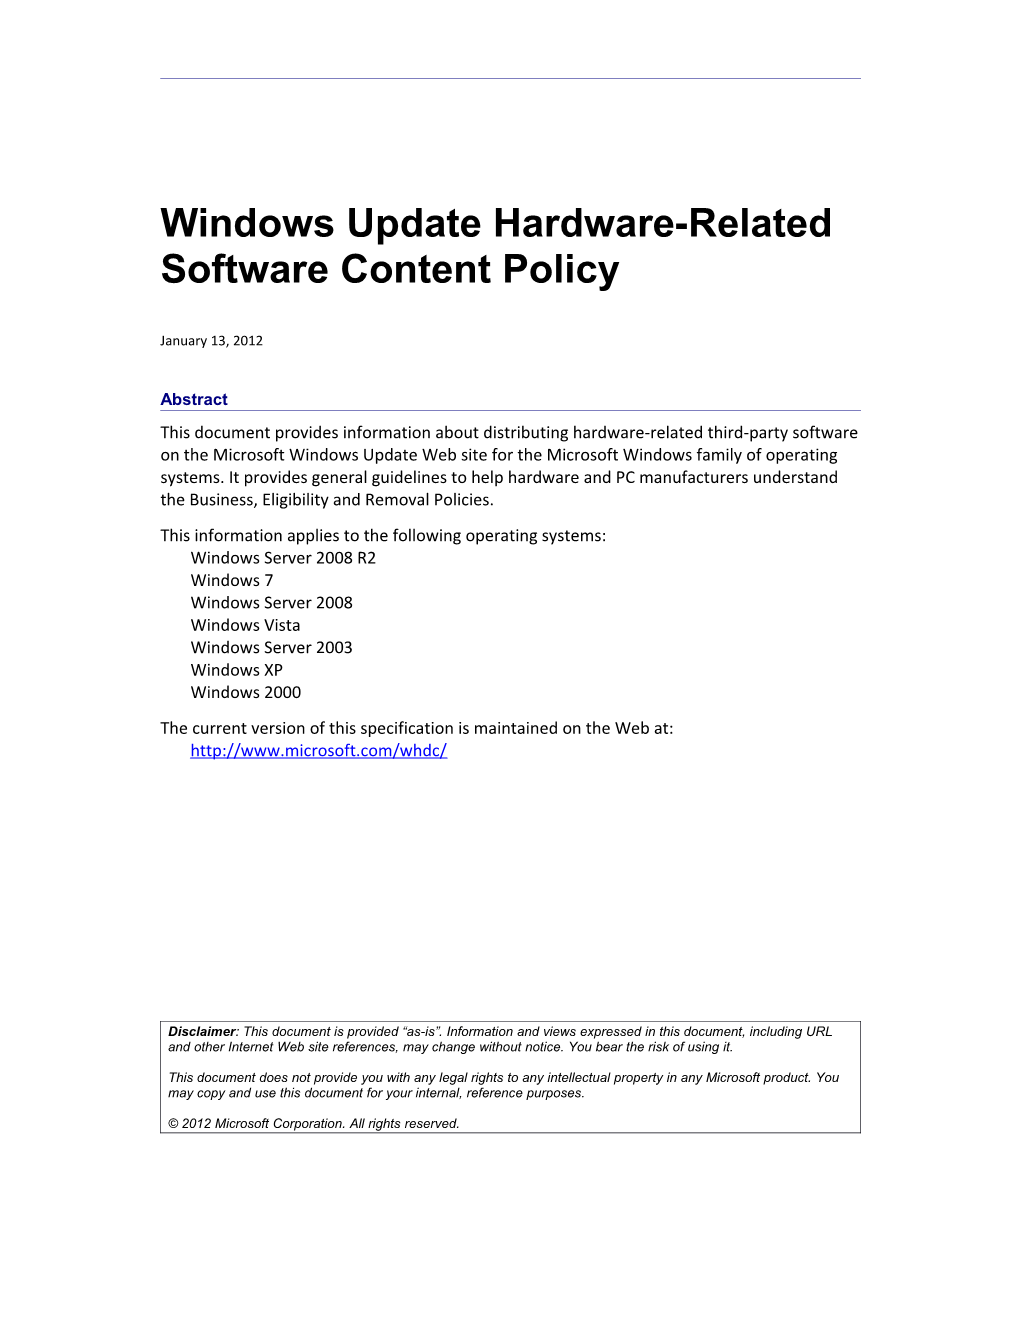 Windows Update Hardware-Related Software Content Policy - 1